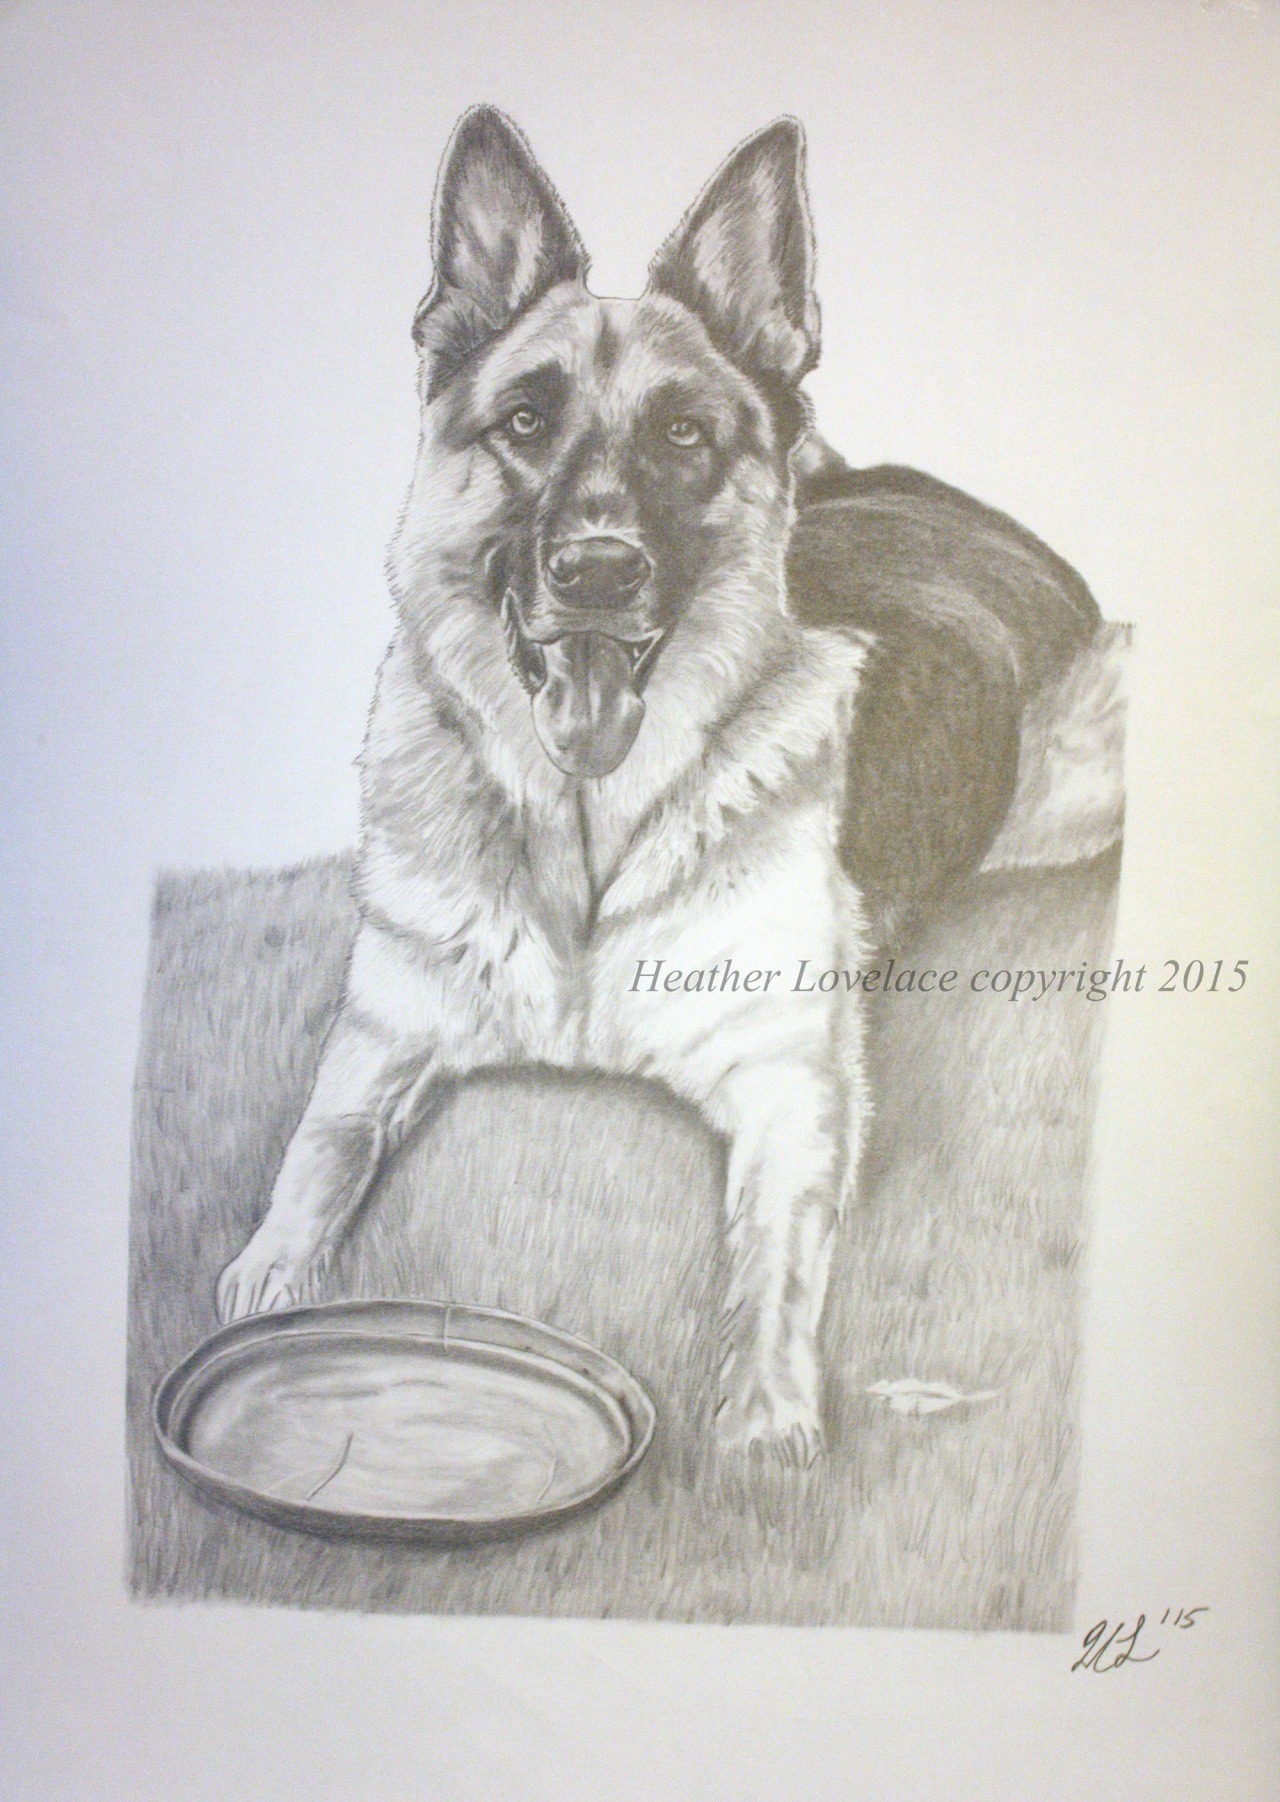 A commissioned portrait of their black/tan German Shepherd. Staedtler Mars Lumograph graphite pencils  used on 18?X24? Canson paper.